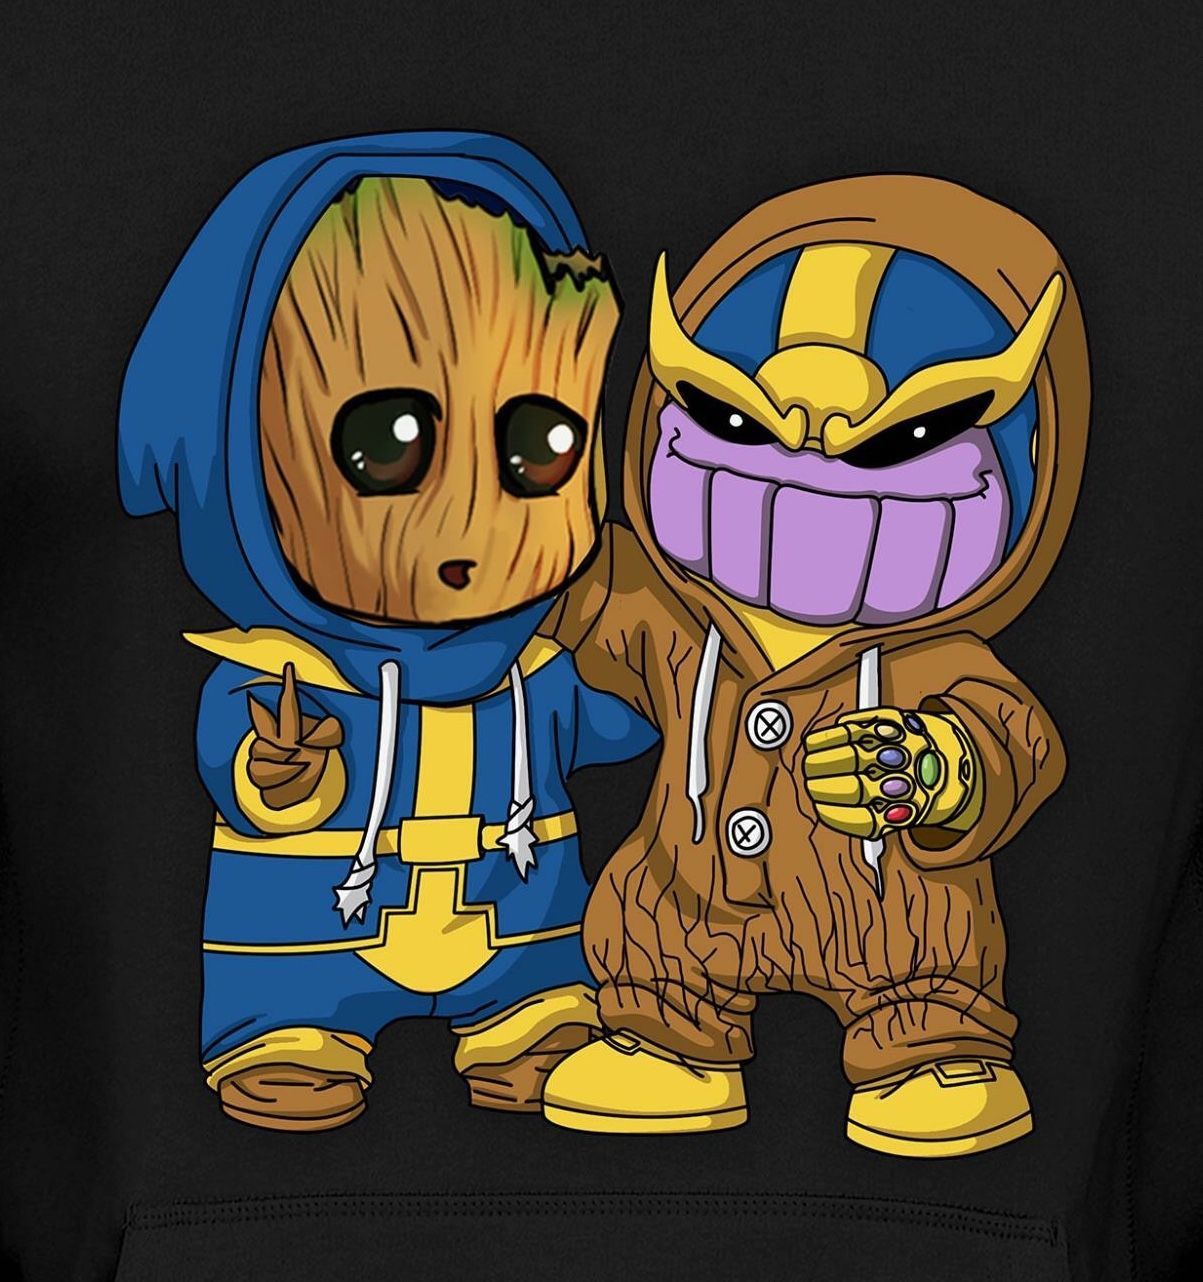 Baby Groot [as Thanos] & Thanos [as Baby Groot] (Drawing by Unknown) #GuardiansOfTheGalaxy2. Dessin groot, Dessins mignons, Dessin animé kawaii